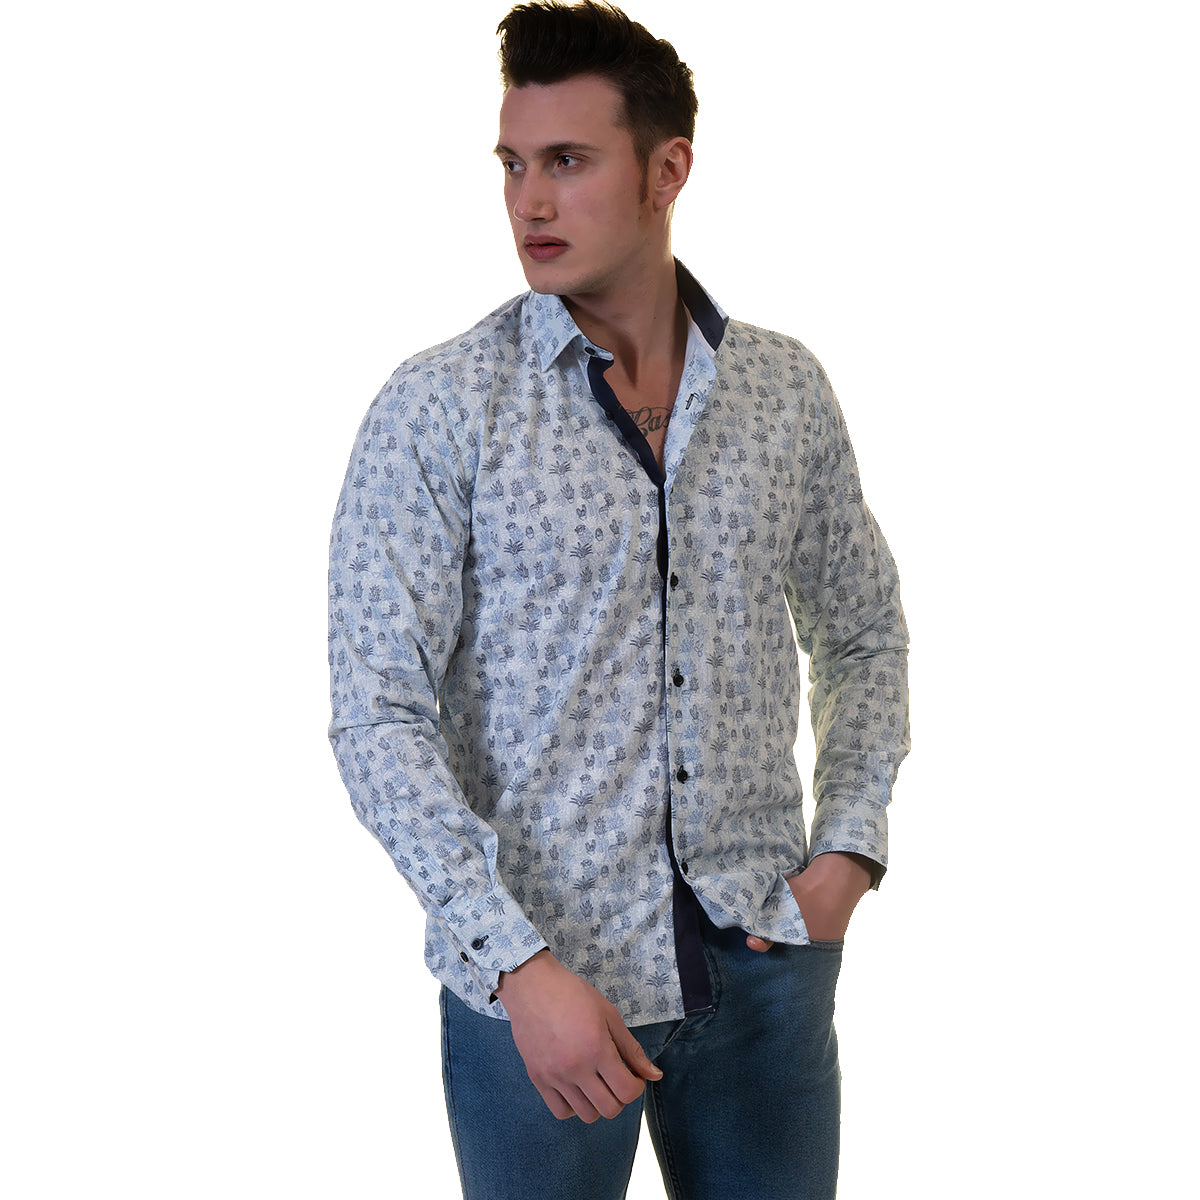 Designer Full Sleeve Blue Color Denim Shirt With Casual Pattern